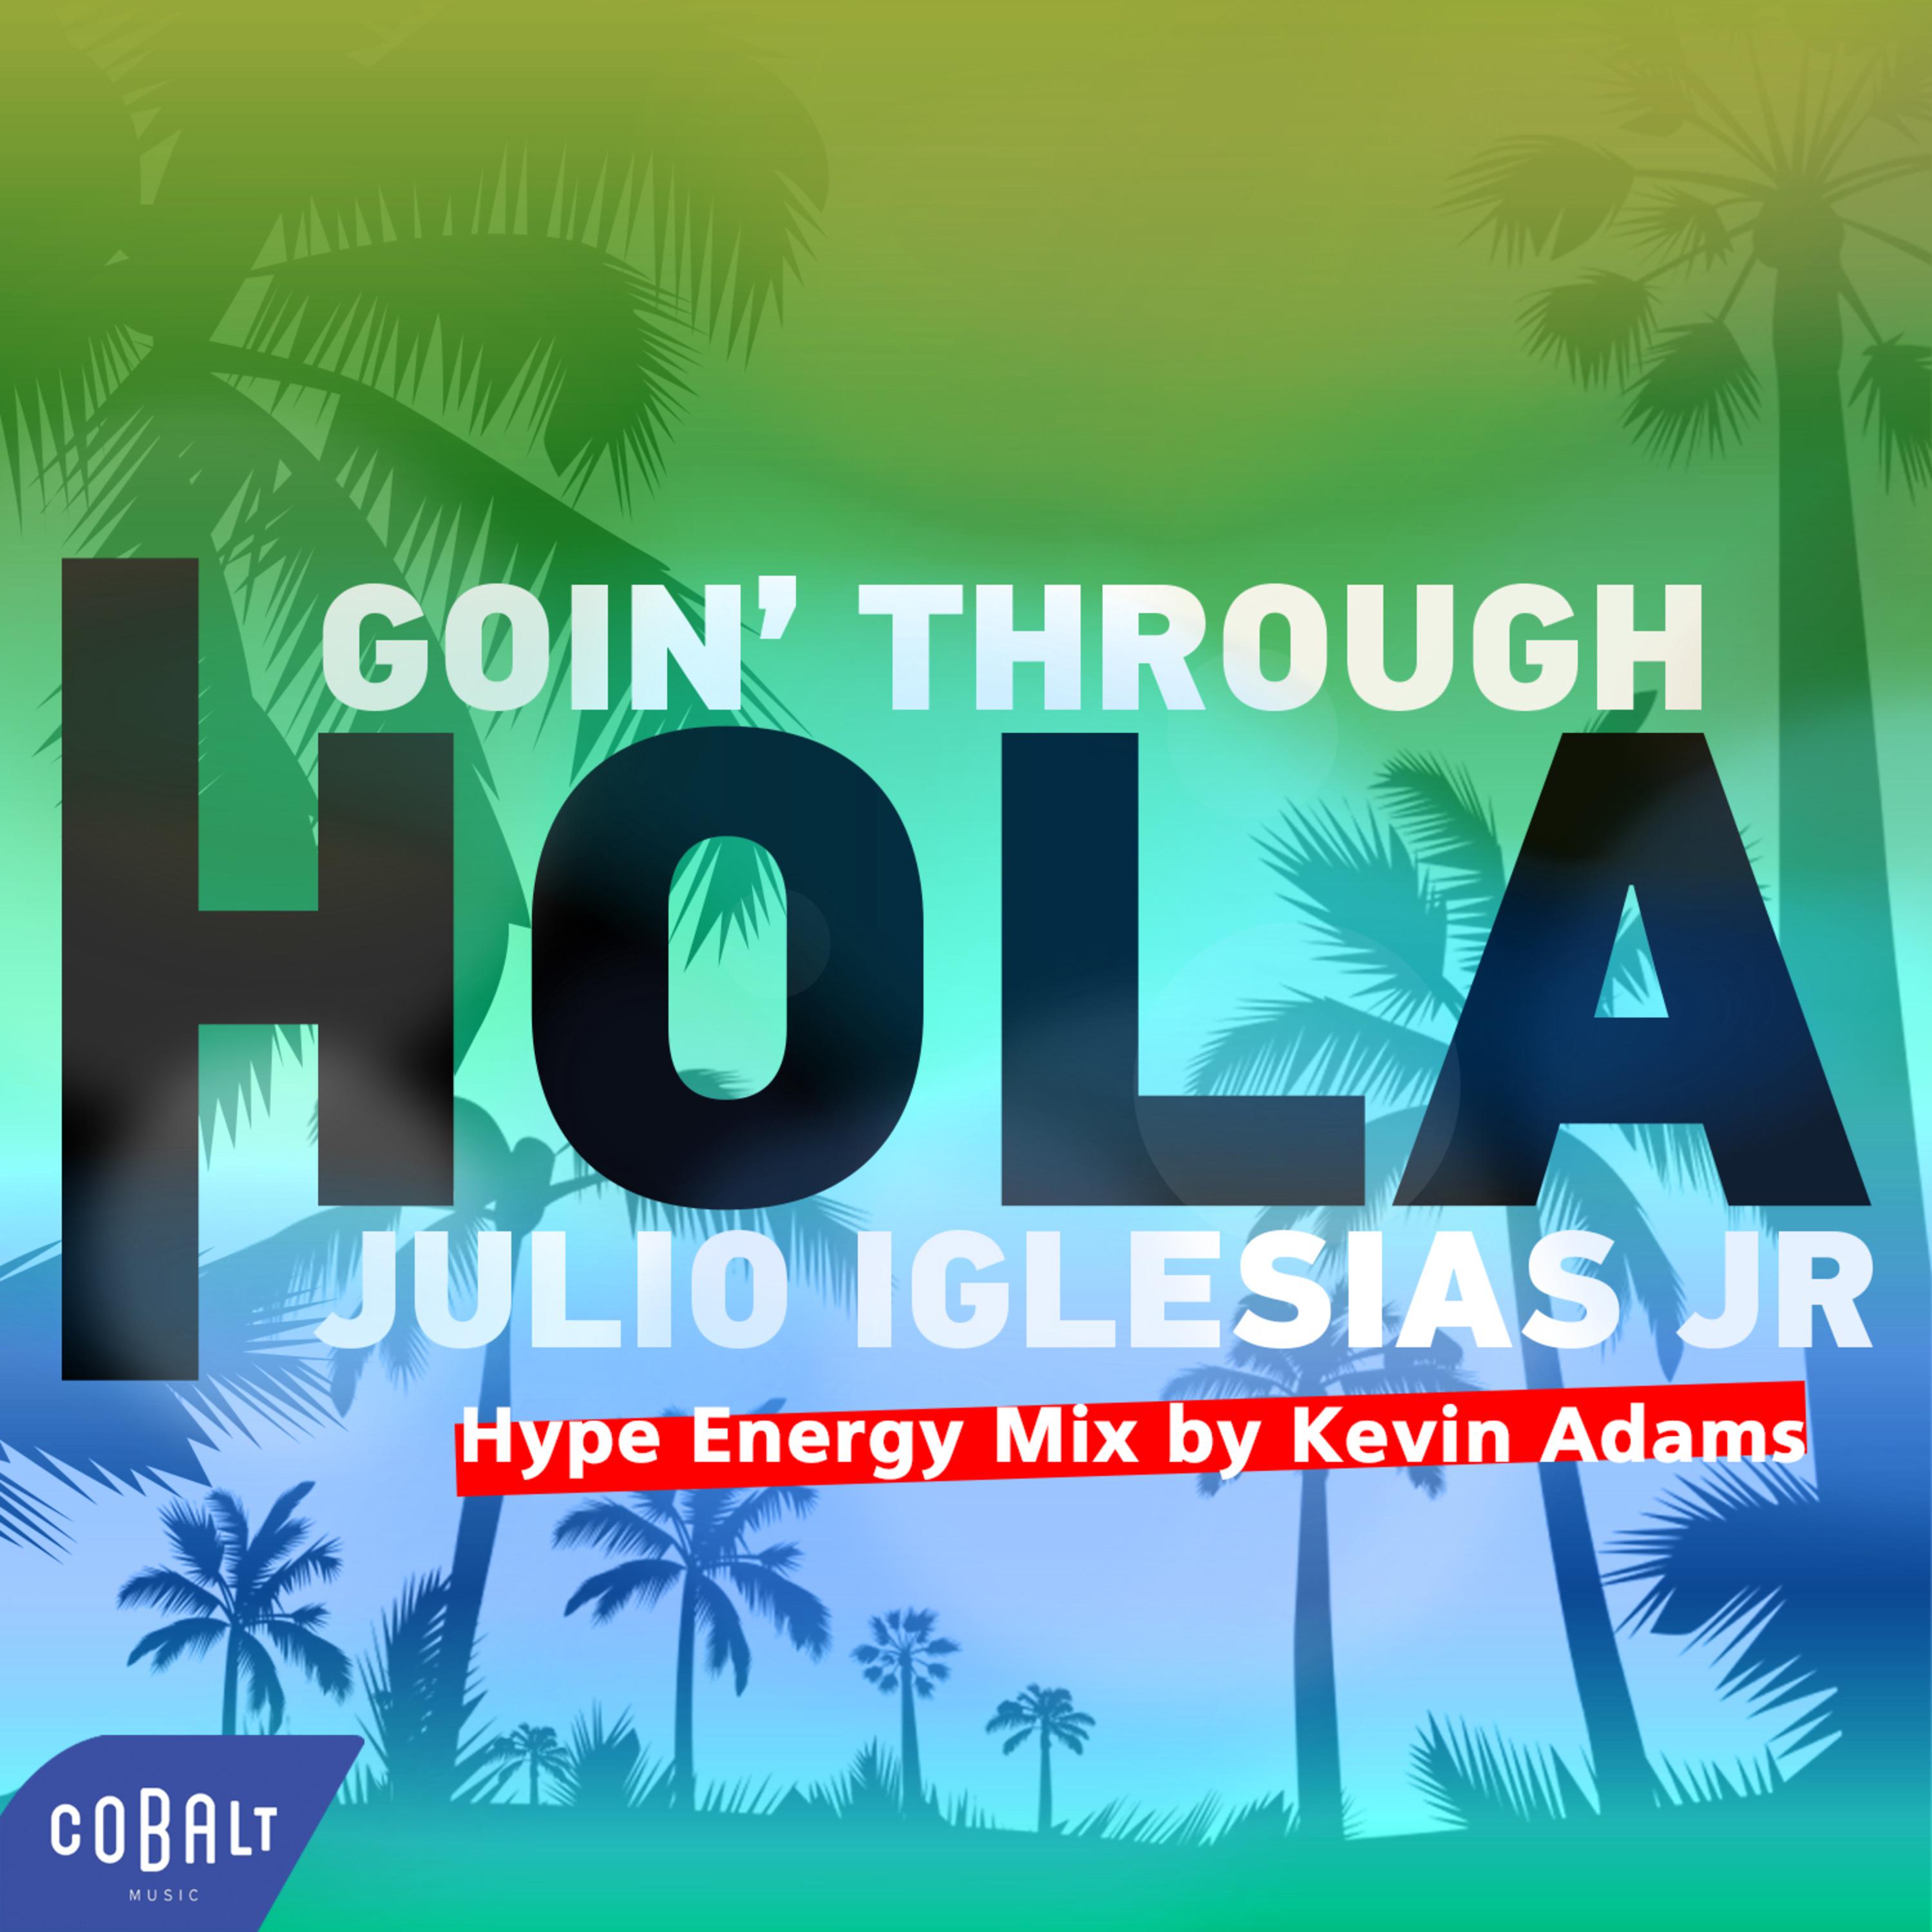 Hola (Hype Energy Mix by Kevin Adams)